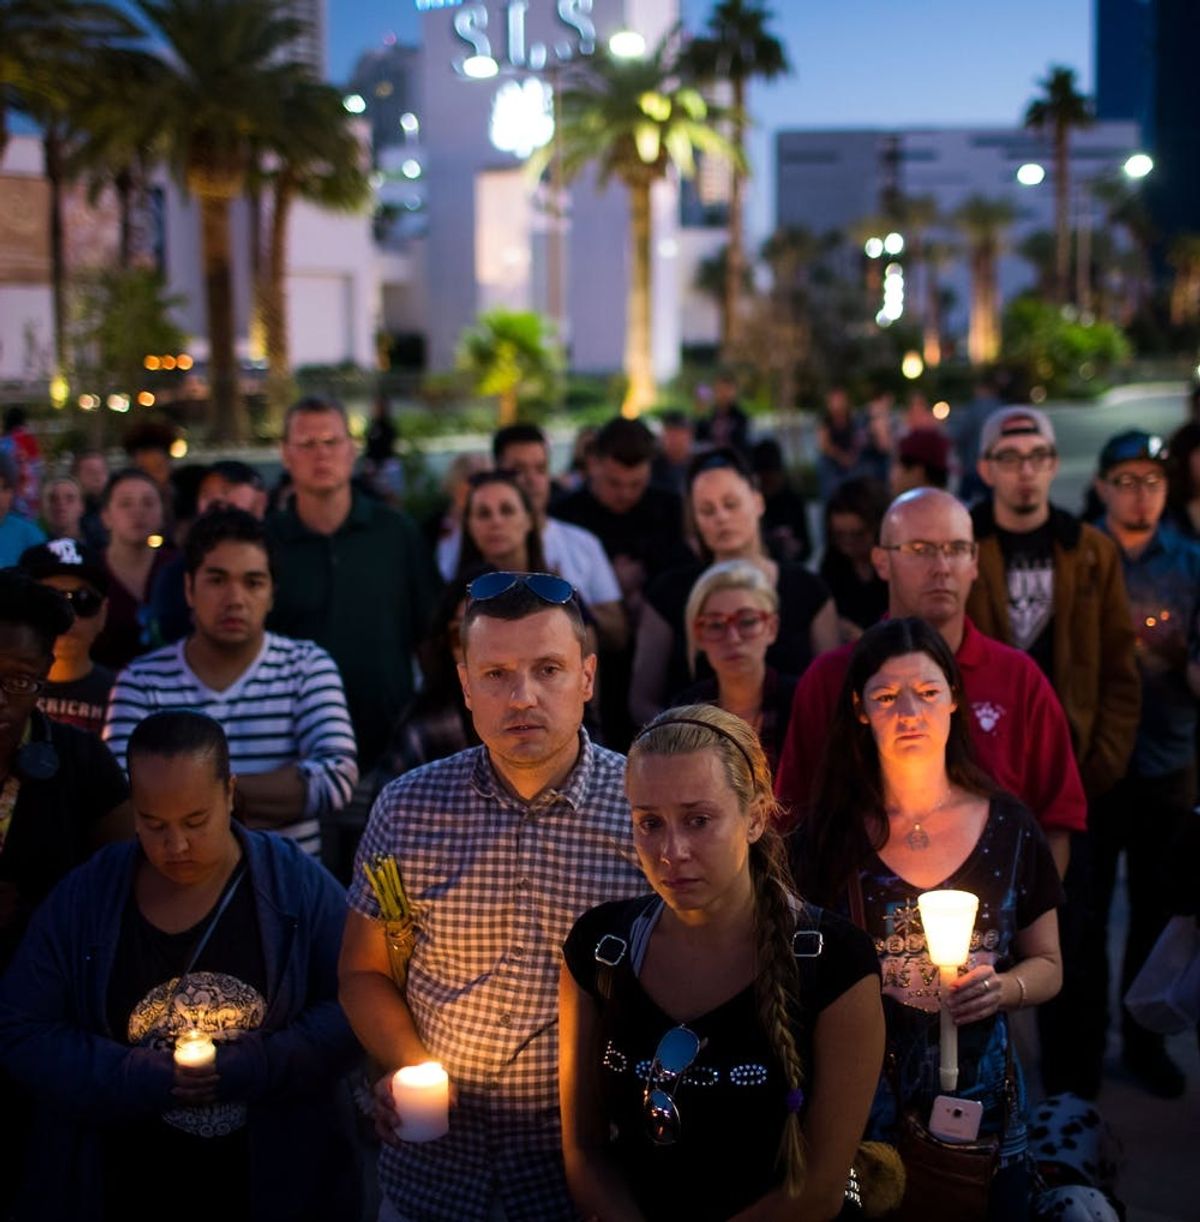 Remembering the Victims of the Las Vegas Shooting